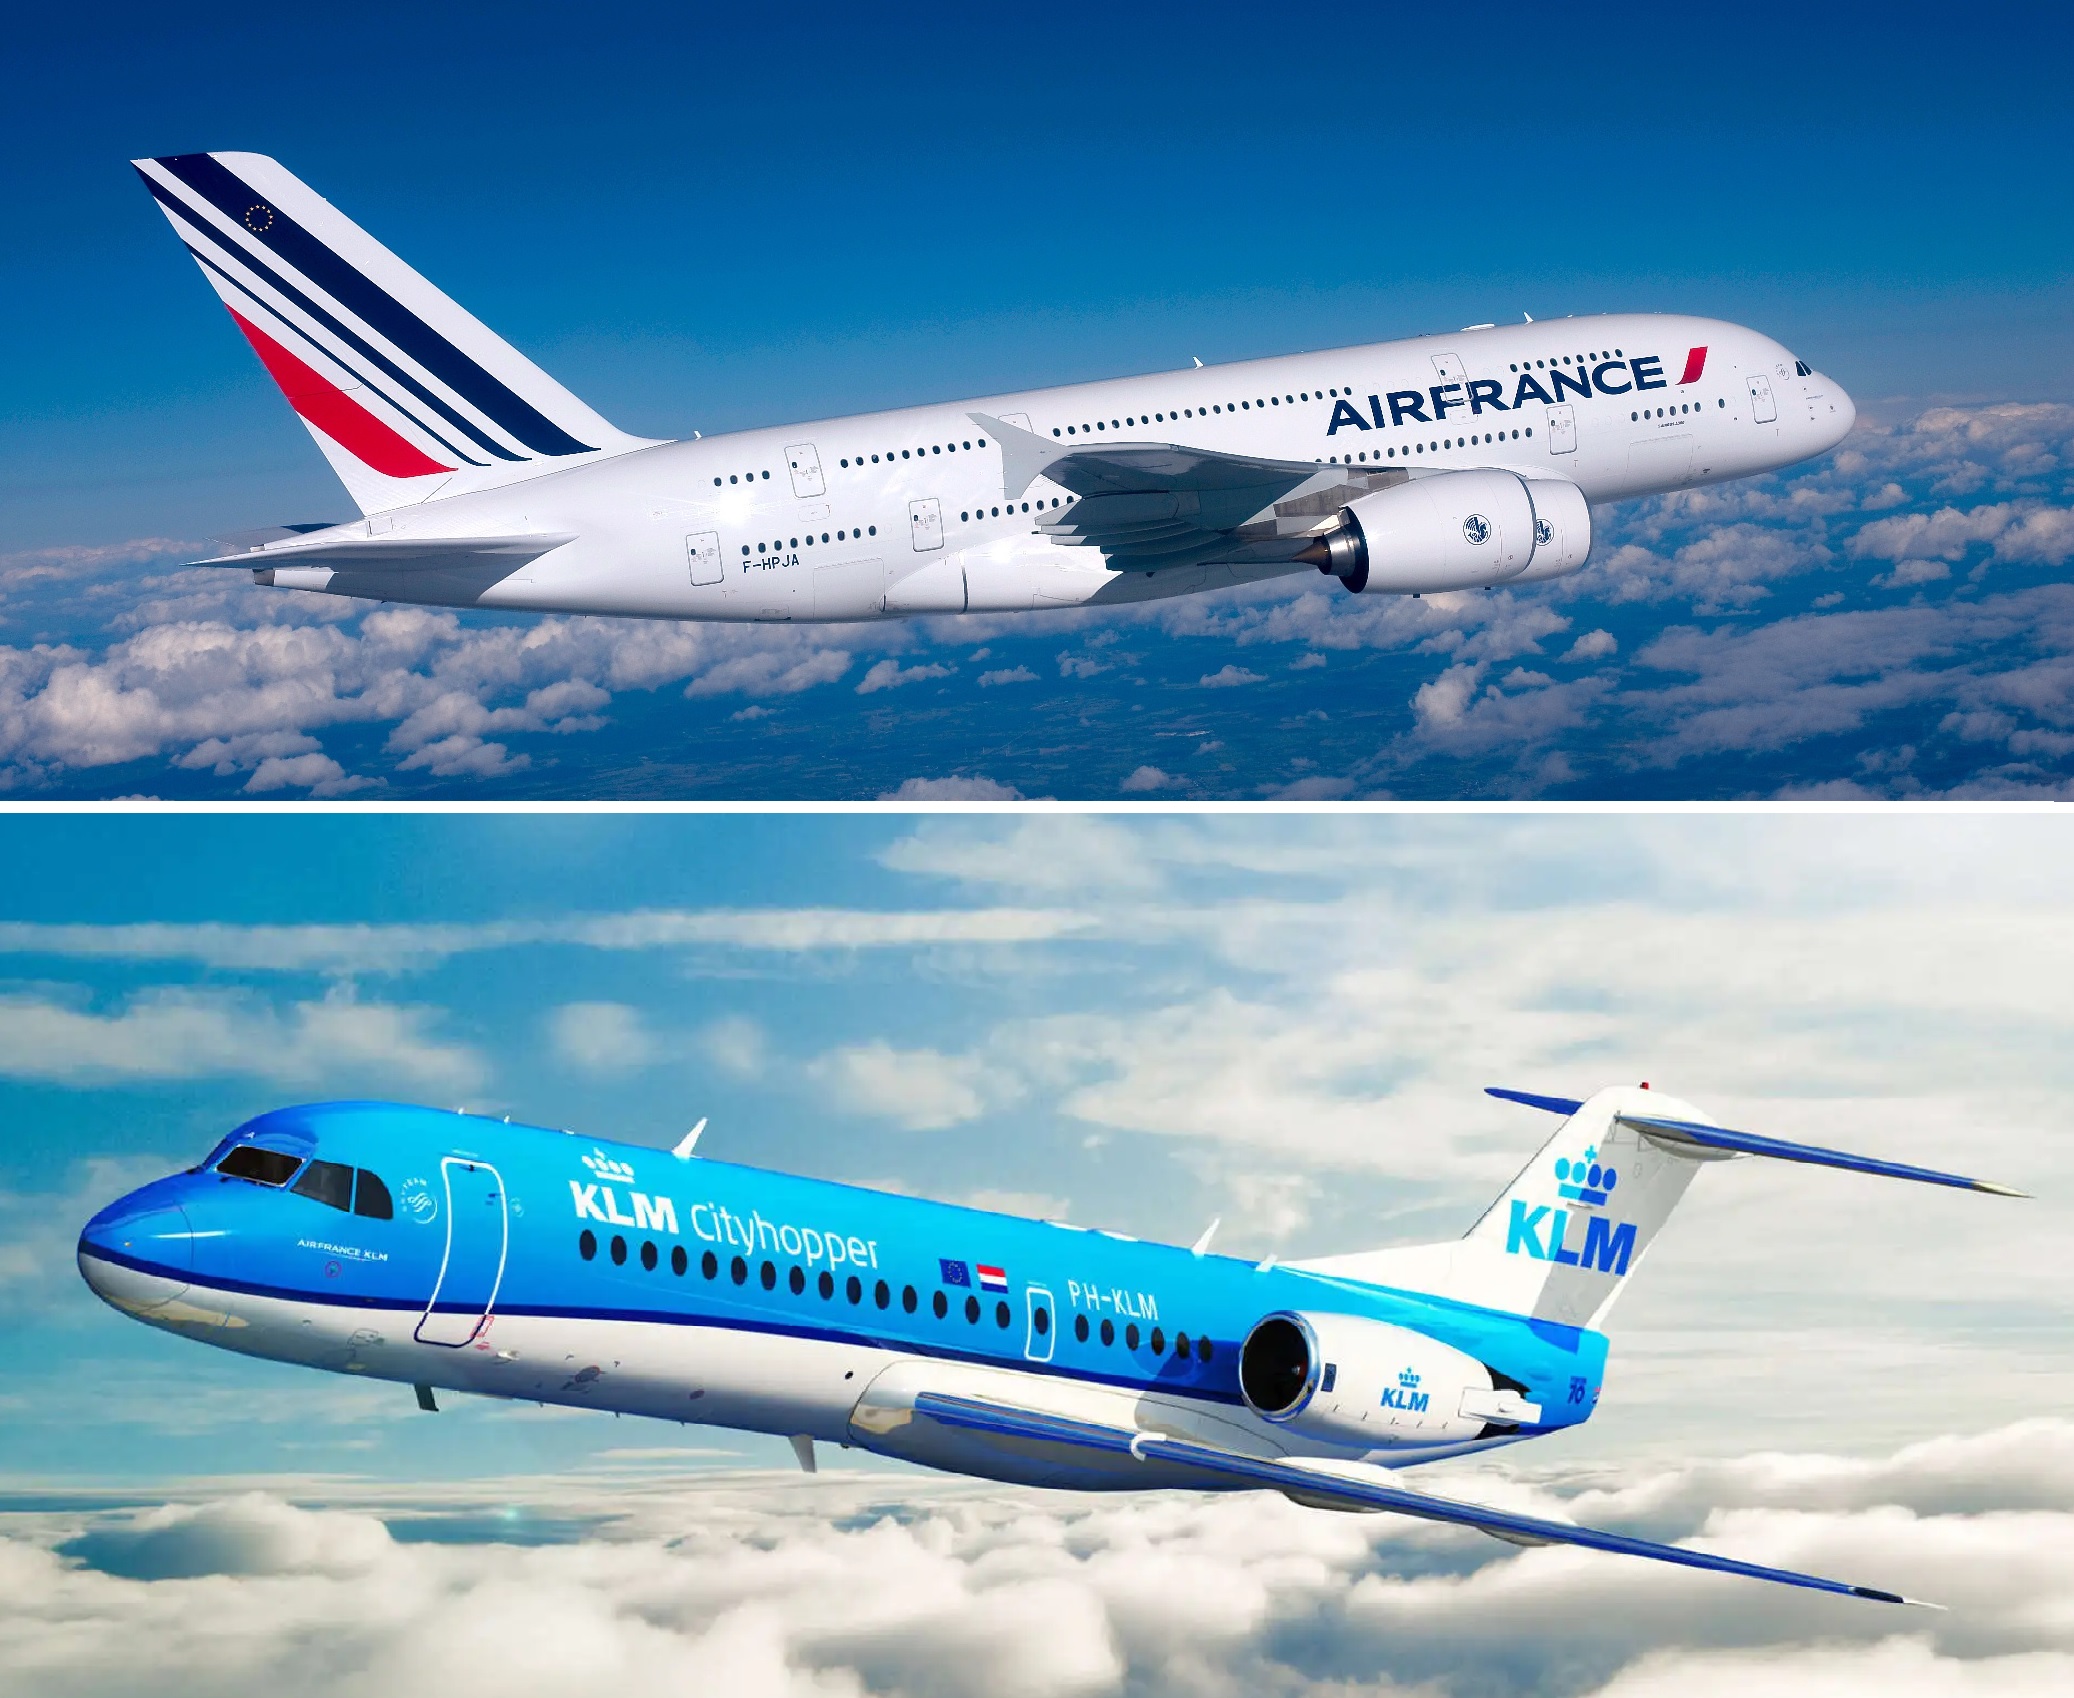 Sale of Air France-KLM tickets from Kyiv